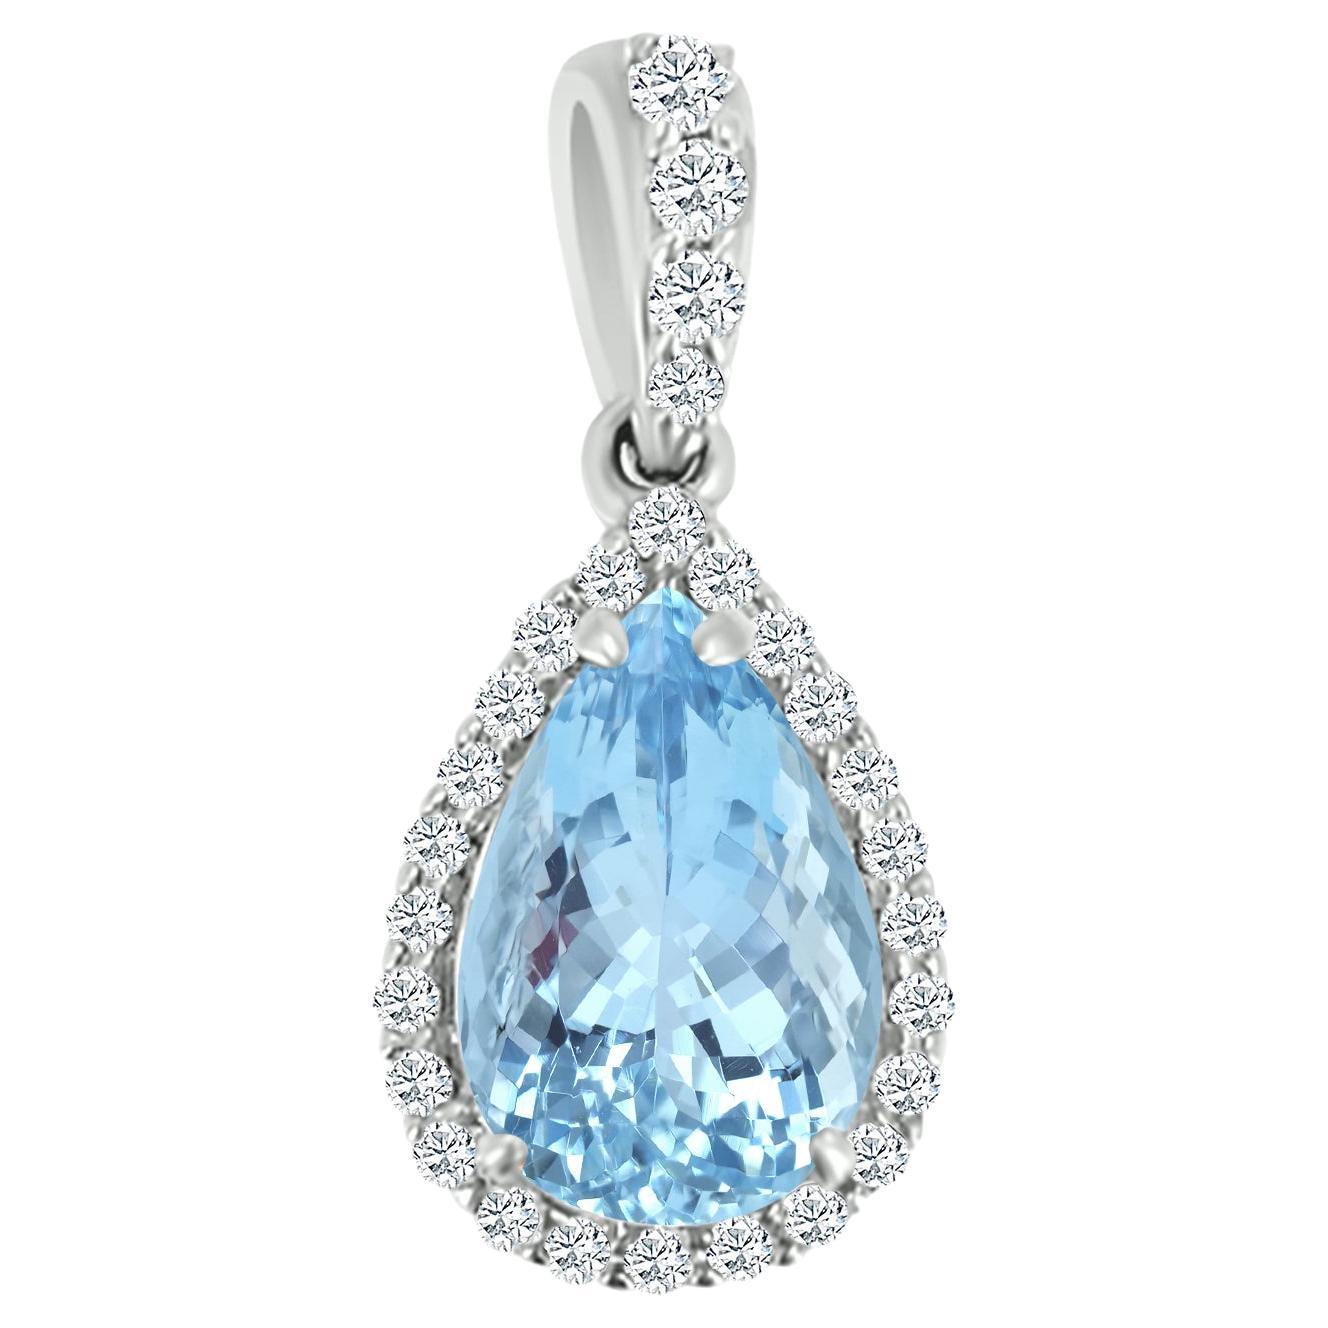 14k White Gold 0.92cts Aquamarine and Diamond Pendant, Style#TS1234AQP 22053/4 For Sale